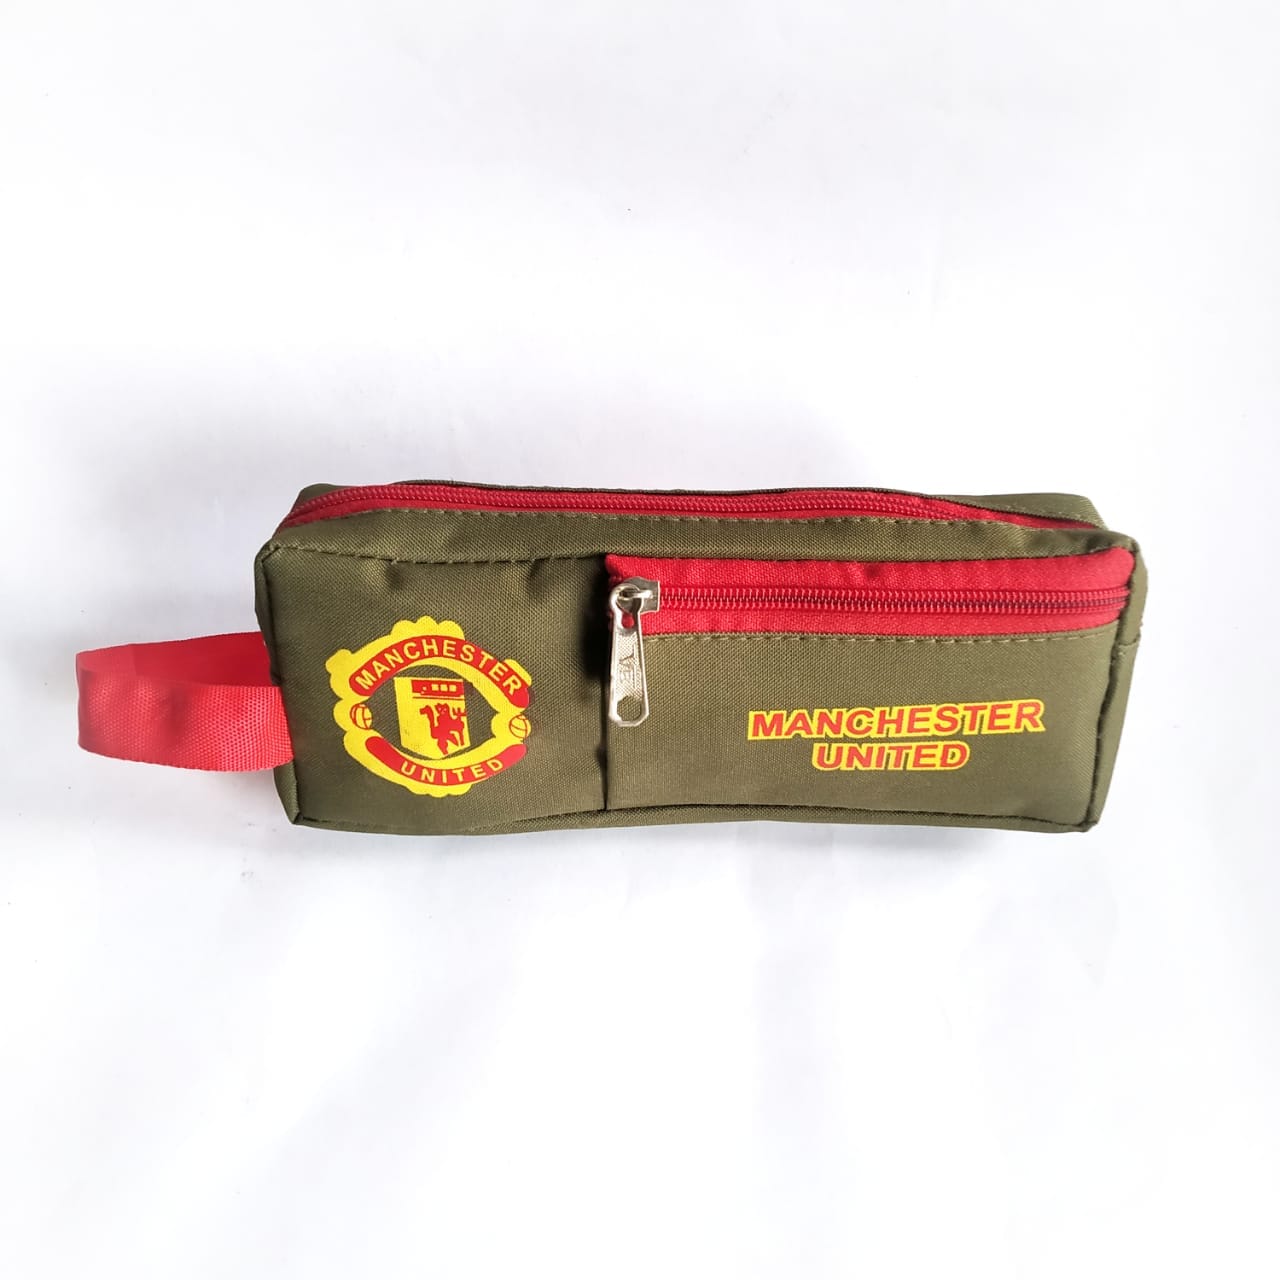 Mumbai market School Essentials Manchester United Pencil Pouch - Zippered, 3 Compartments - Pack of 1